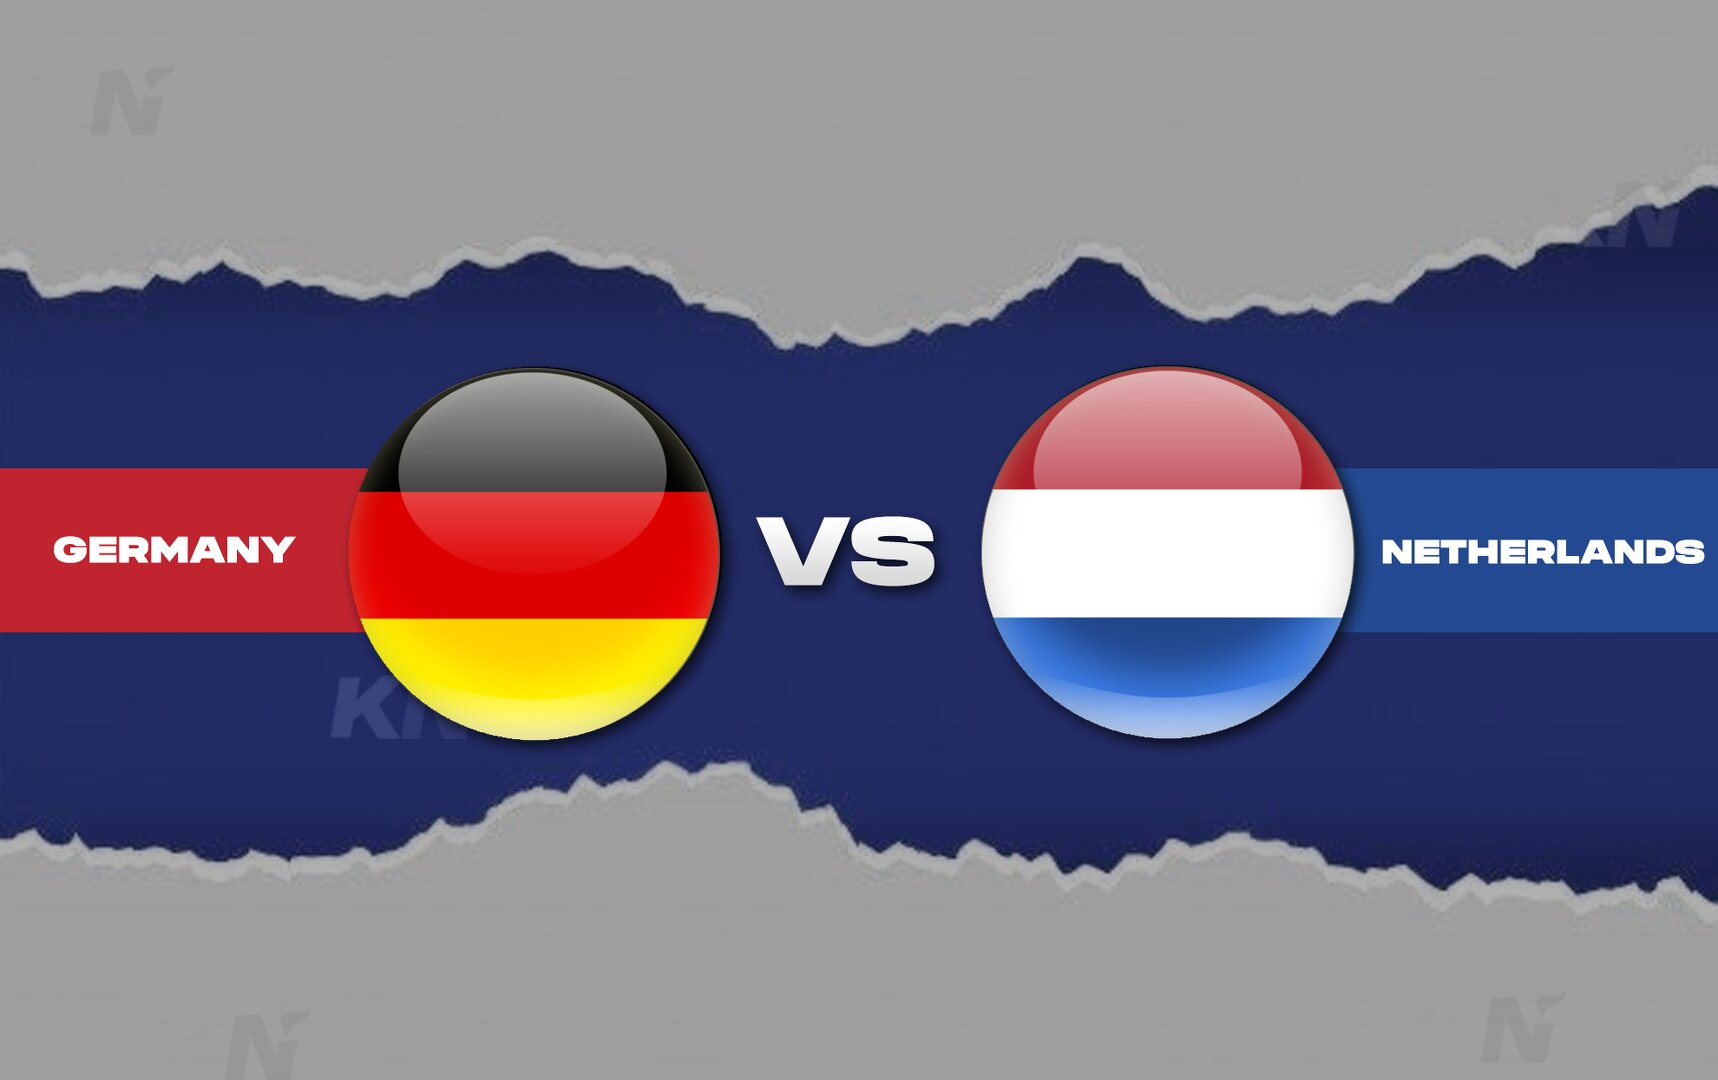 Germany vs Netherlands: Live streaming, TV channel, kick-off time & where to watch